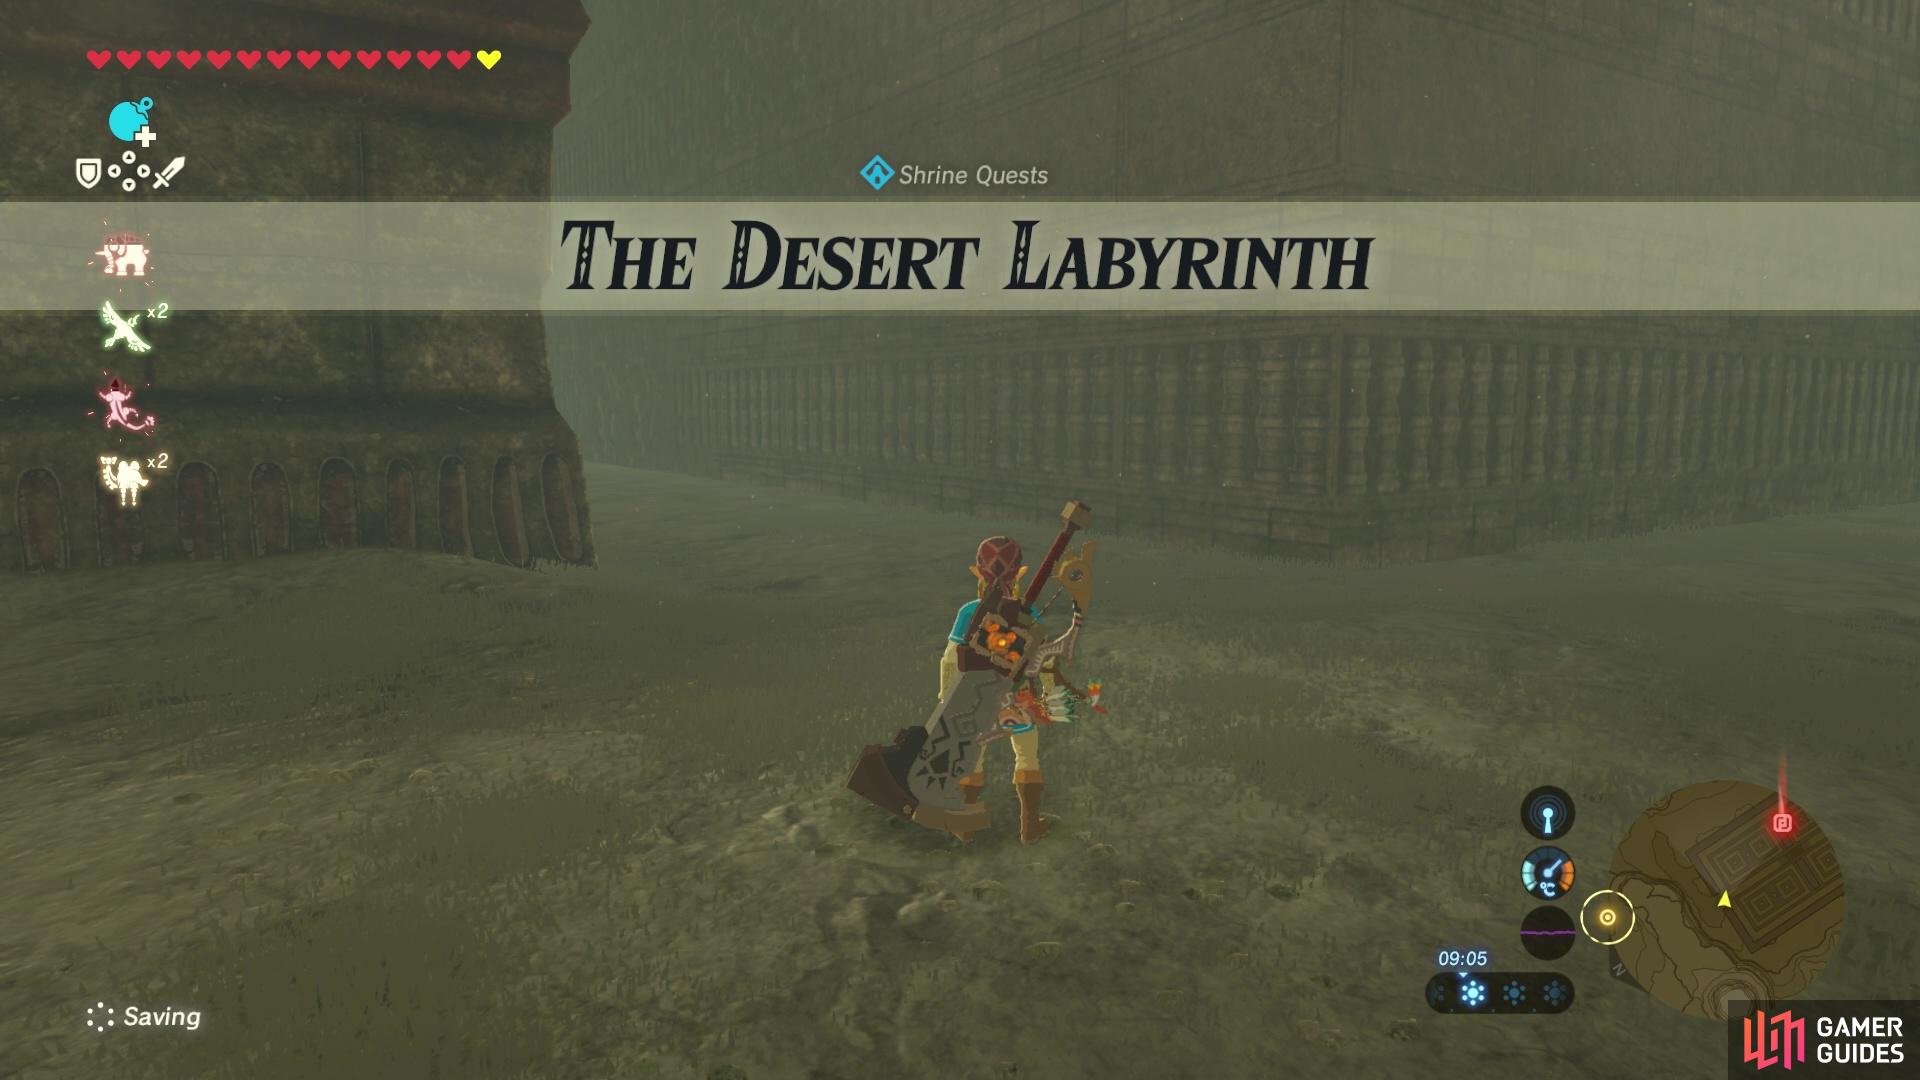 When you enter the Labyrinth, the Shrine Quest, The Desert Labyrinth will begin